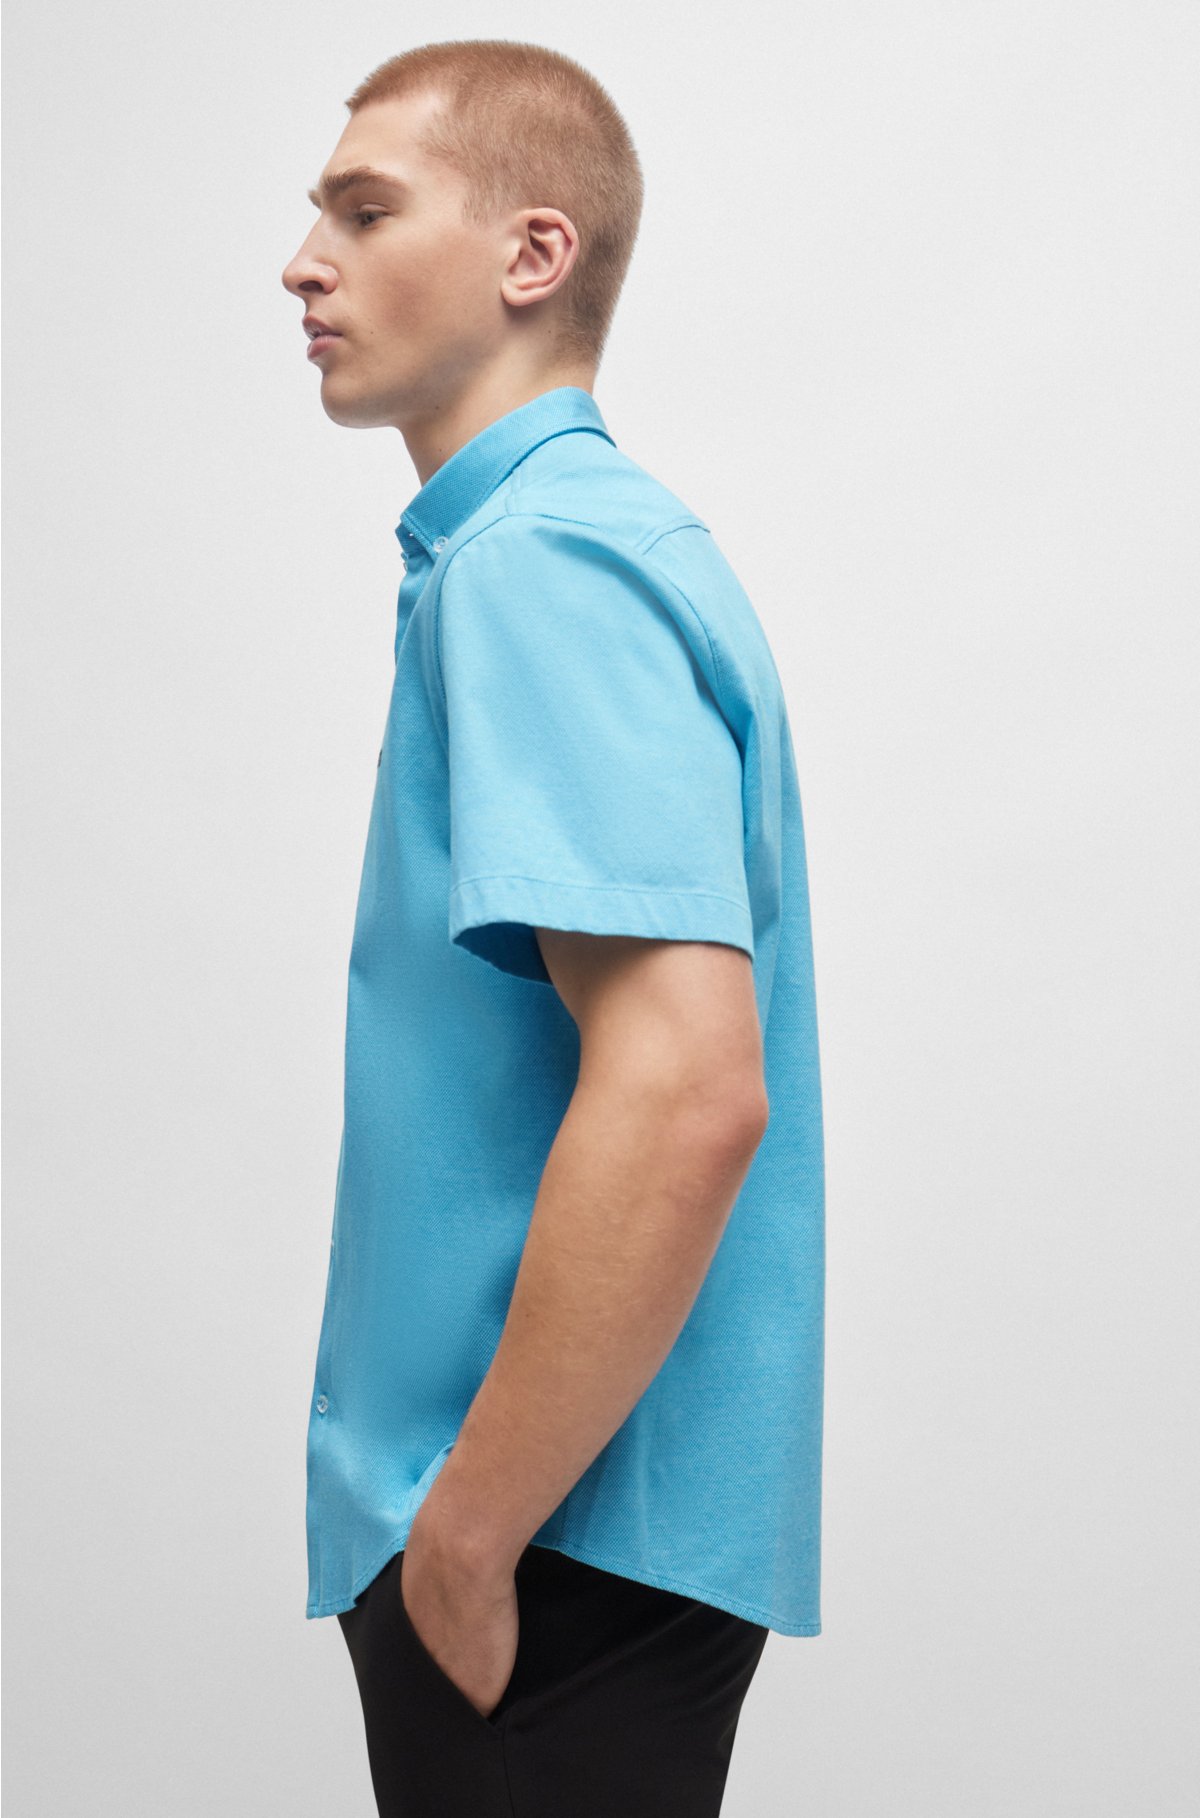 Regular-fit shirt in cotton piqué jersey, Turquoise